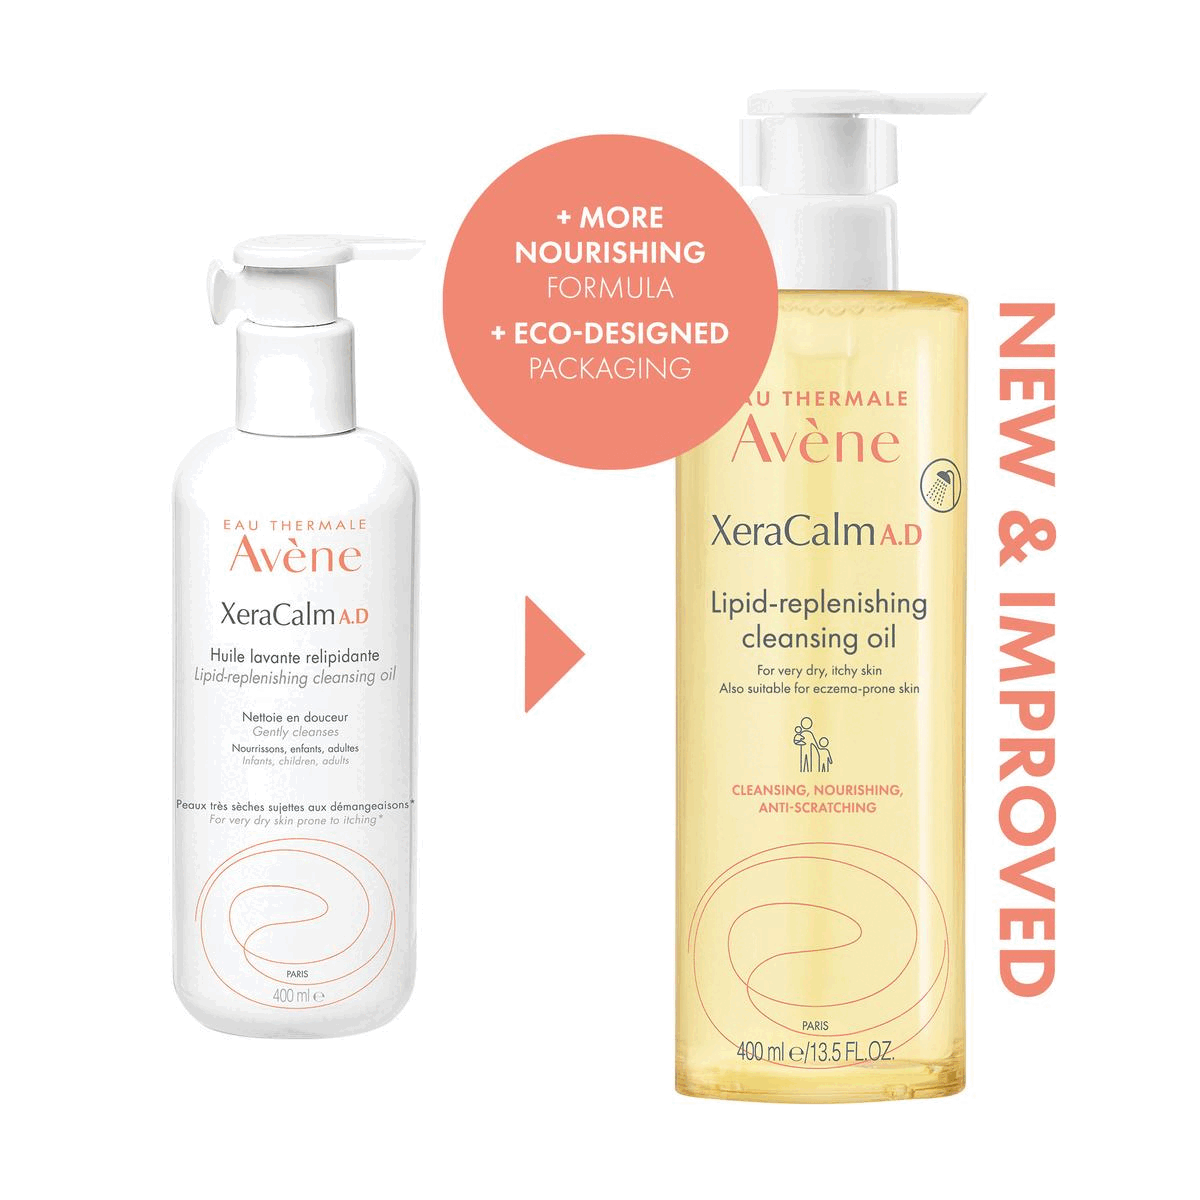 Image 1, new and improved, more nourishing formula and eco-designed packaging. Image 2, gently cleanses the skin and protects it against the drying effects of water. Image 3, product benefits. Image 4, rich and nourishing texture. Image 5, the routine